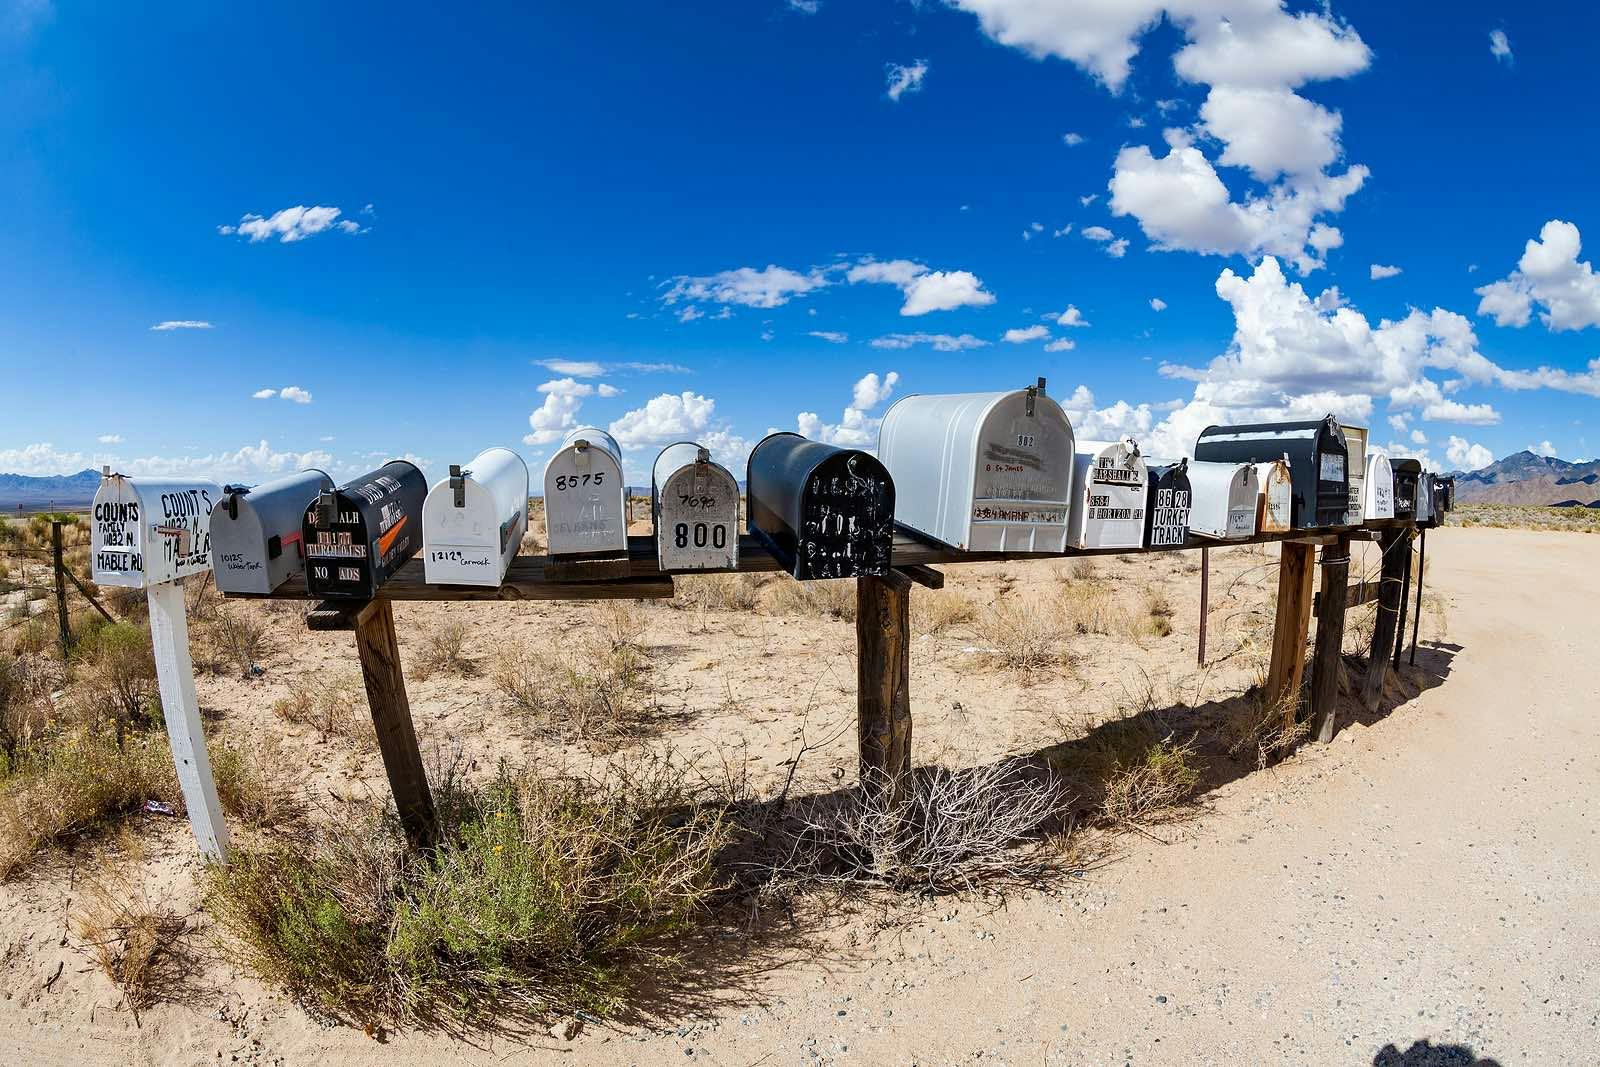 GOLDEN VALLEY, ARIZONA, USA &#8211; SEPTEMBER 6, 2015: Views of mail boxes along the highway 93 on September 6, 2015. Mail boxes are popular photographic motives by tourist from foreign countries.
